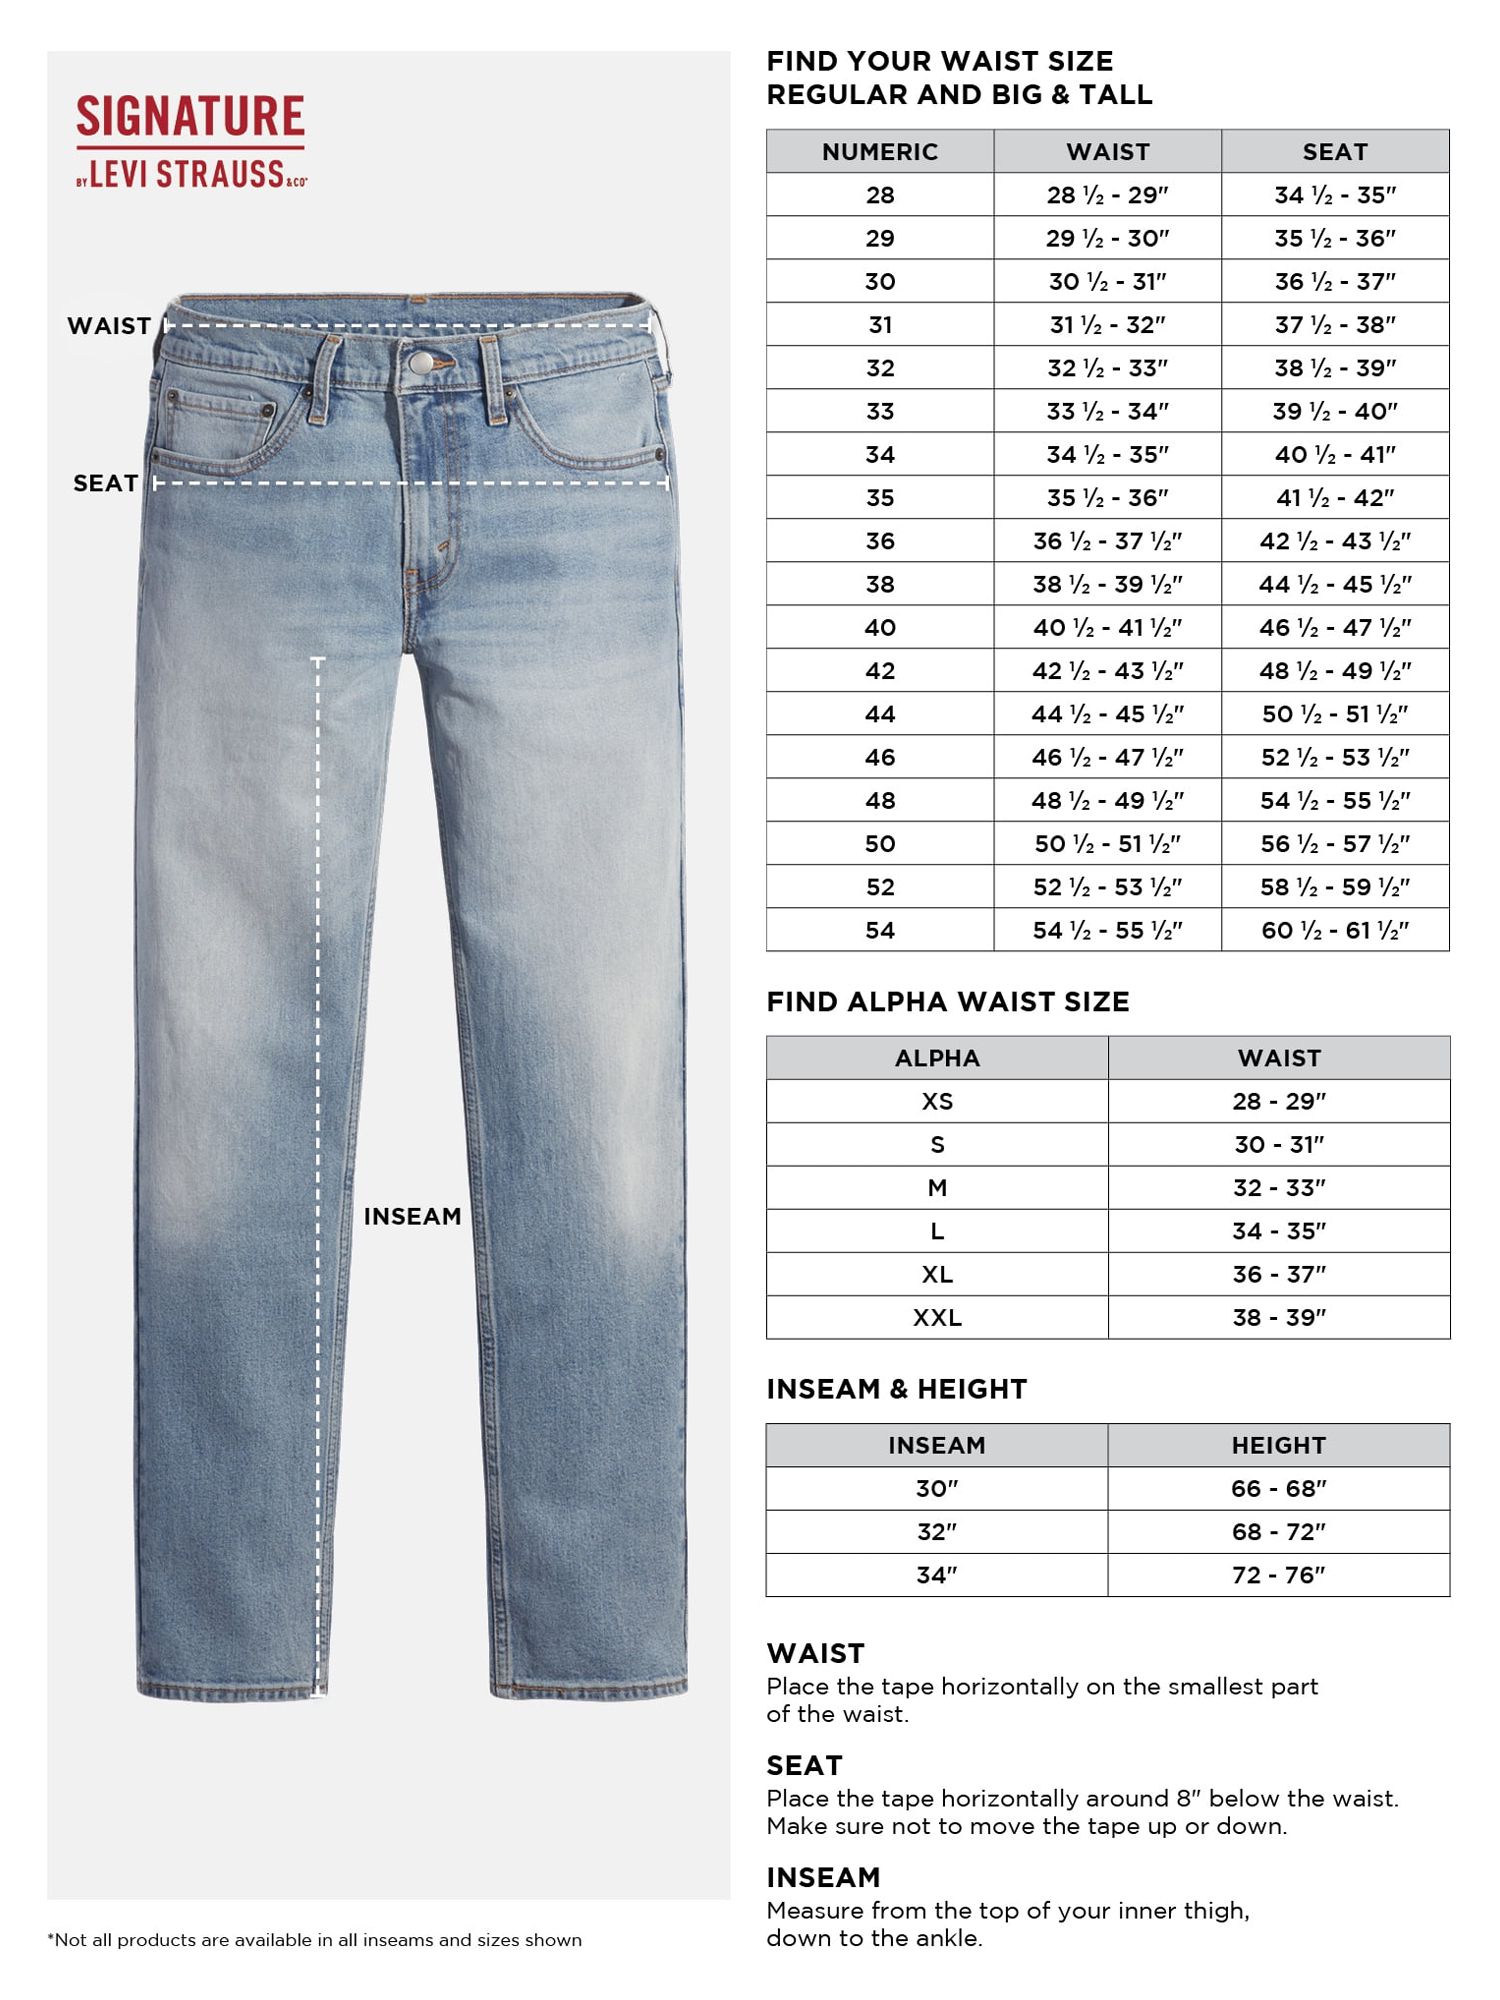 Signature by Levi Strauss & Co. Men's and Big and Tall Relaxed Fit Jeans - image 5 of 6